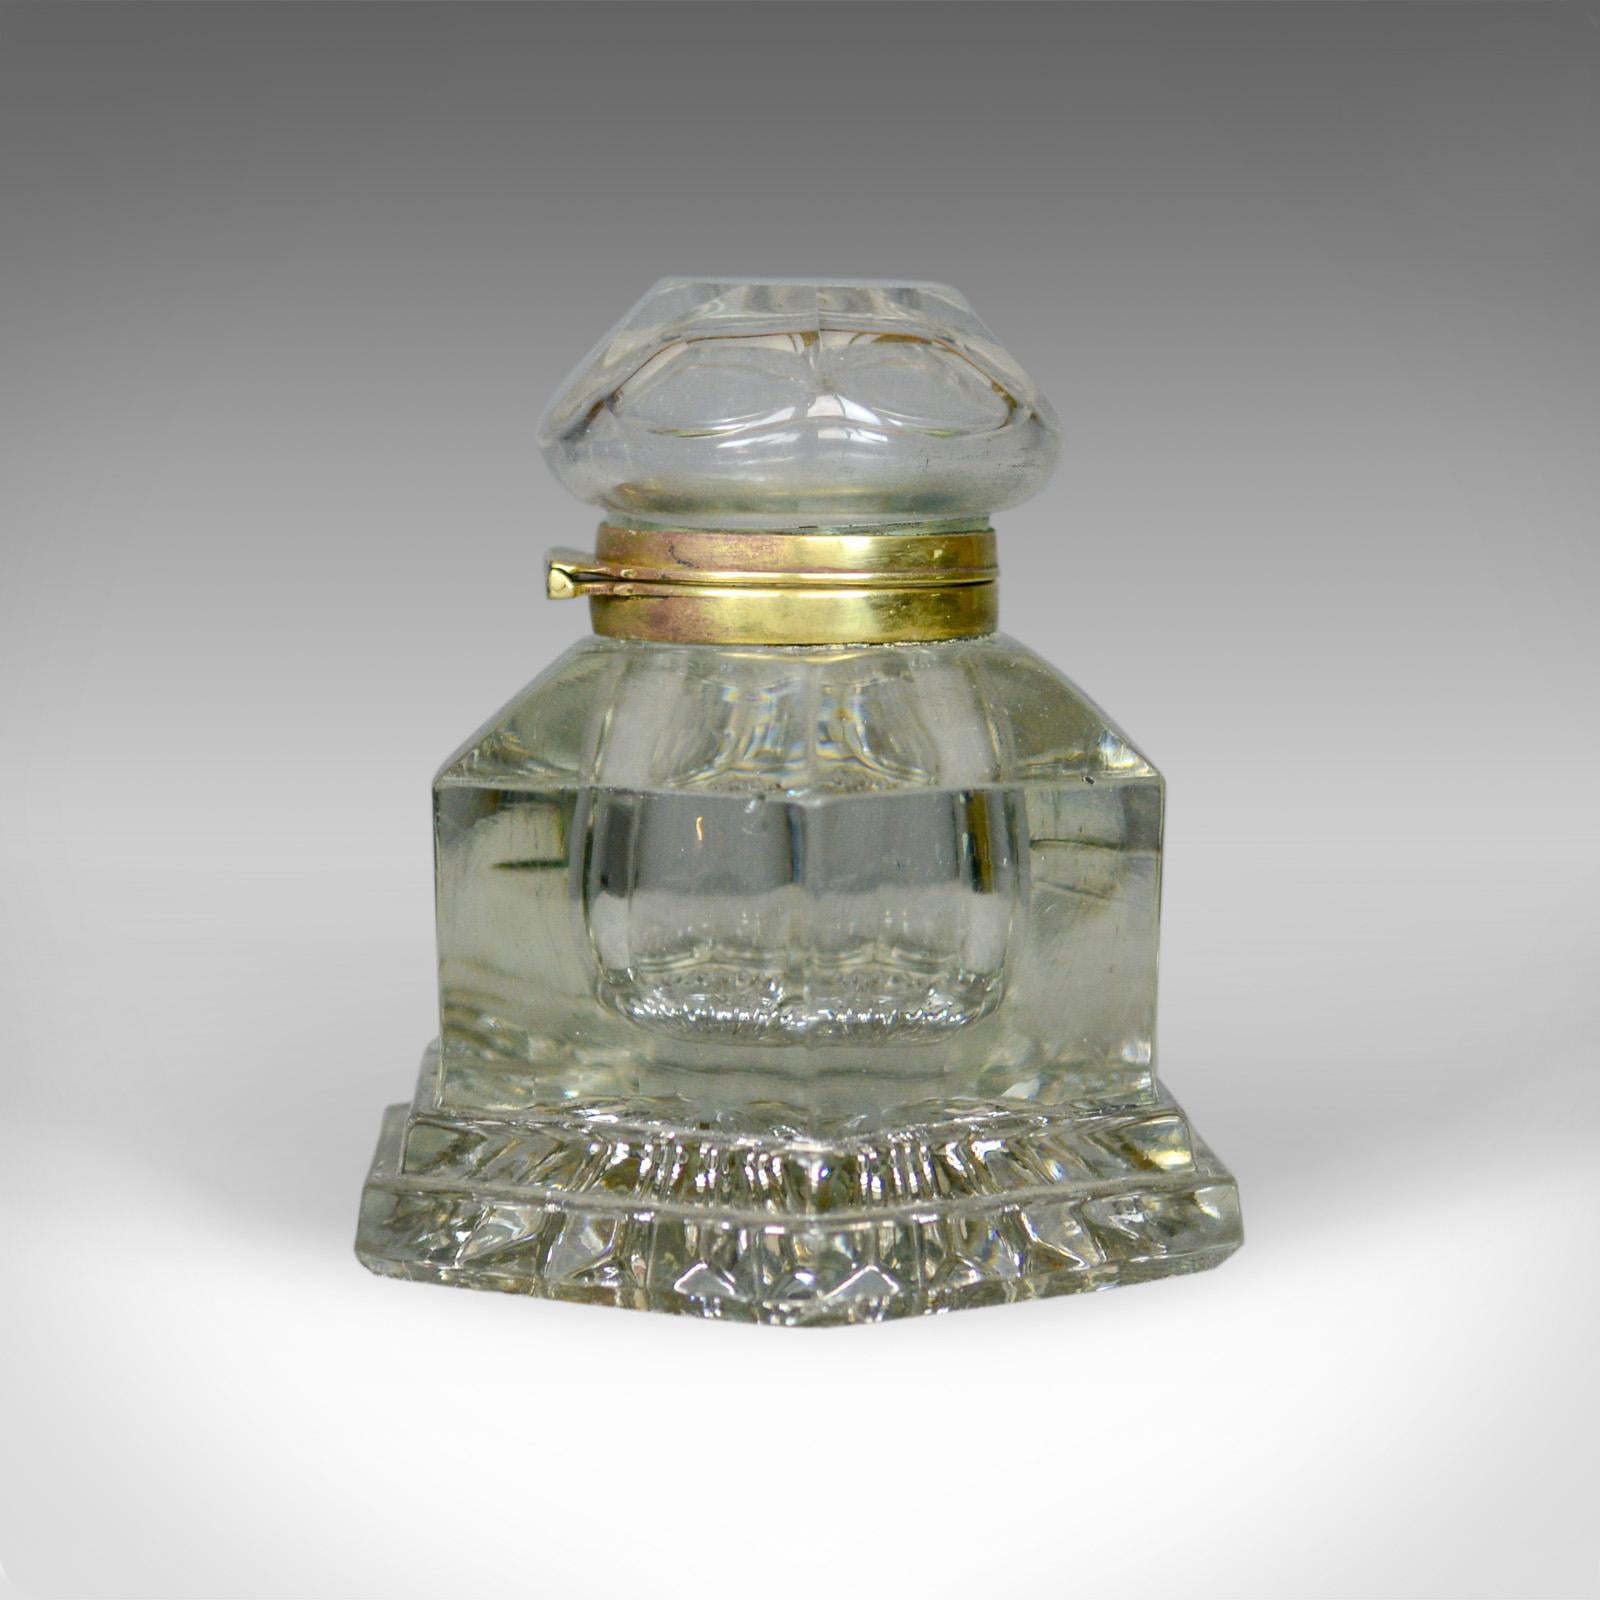 This is a large antique ink well. An English, crystal glass, desk ink well dating to the mid-19th century, circa 1850.

Larger than most at 13 cm, 5 inches high
Hexagonal in form with floral base pattern
Hinged lid opens smoothly
Canted